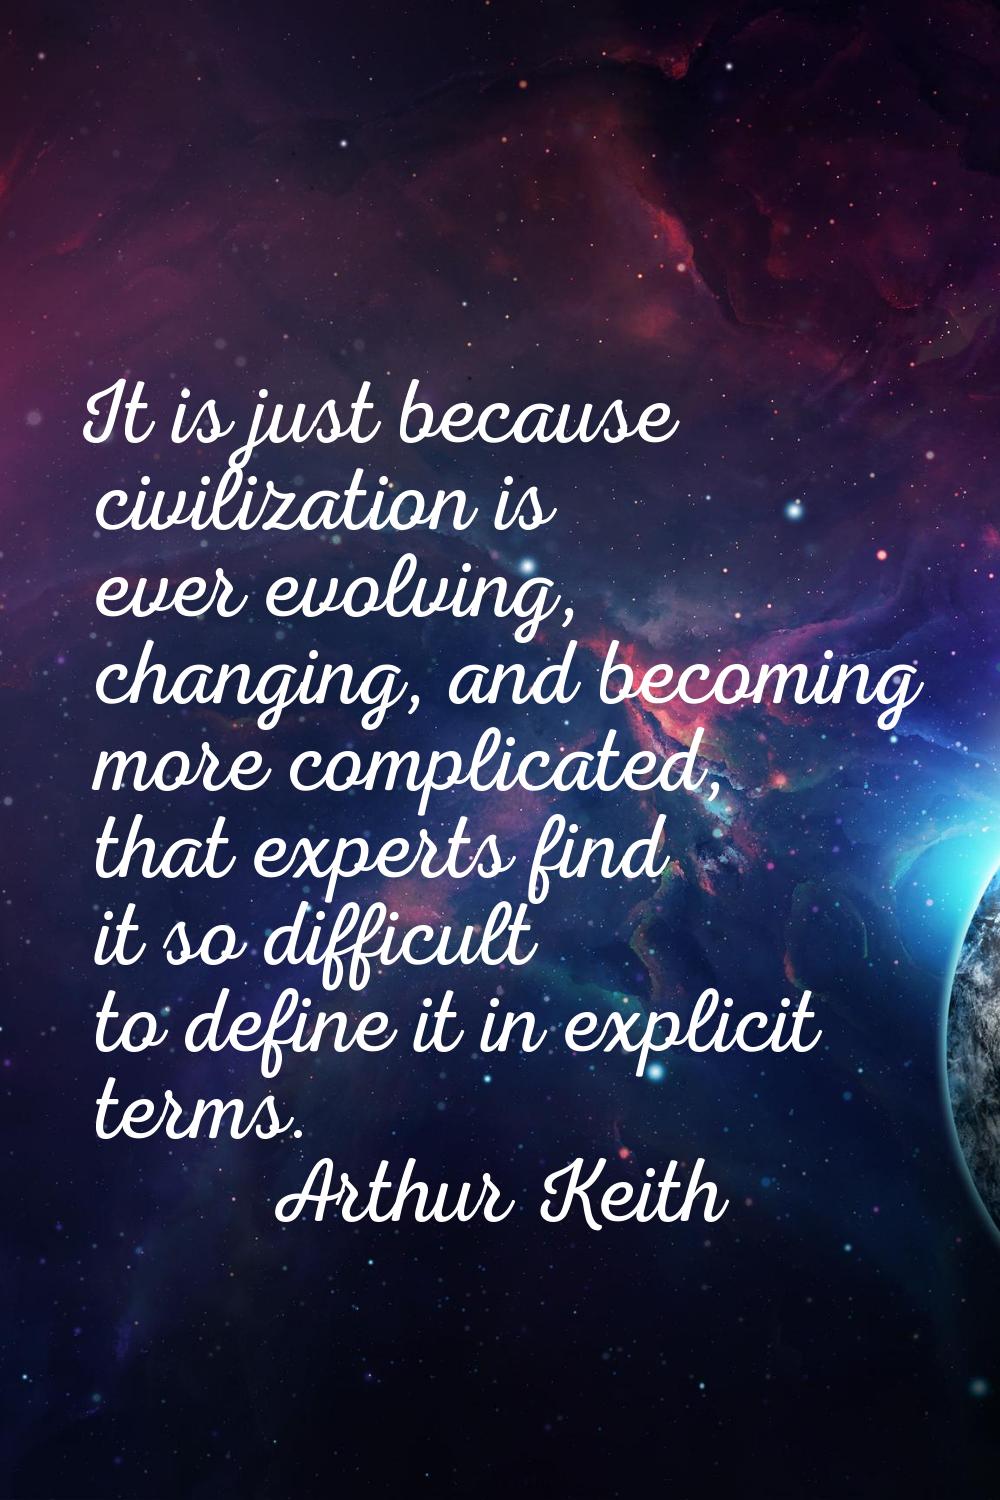 It is just because civilization is ever evolving, changing, and becoming more complicated, that exp